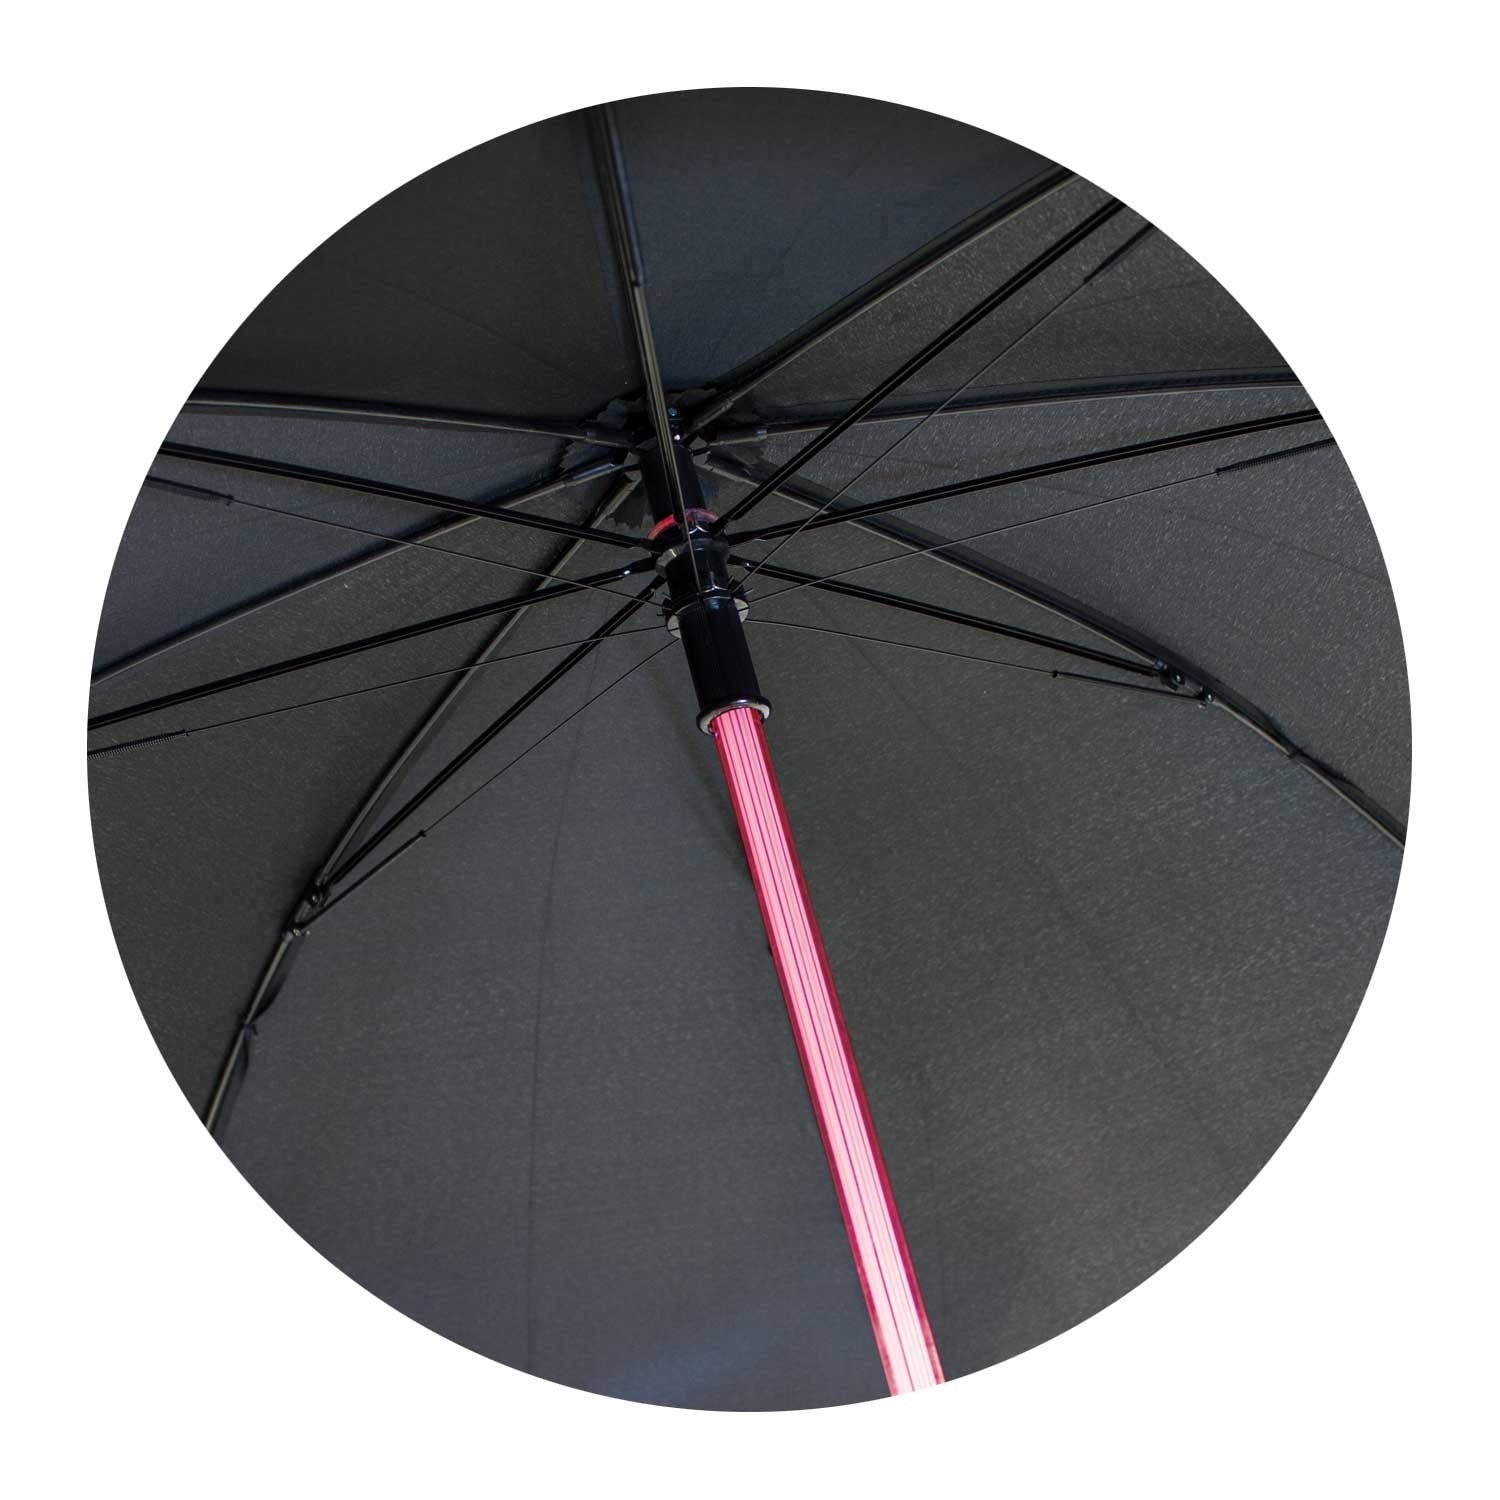 ZEUS®️ Light Sabre LED Neon Light Up Umbrella with Additional Torch in Base of Handle